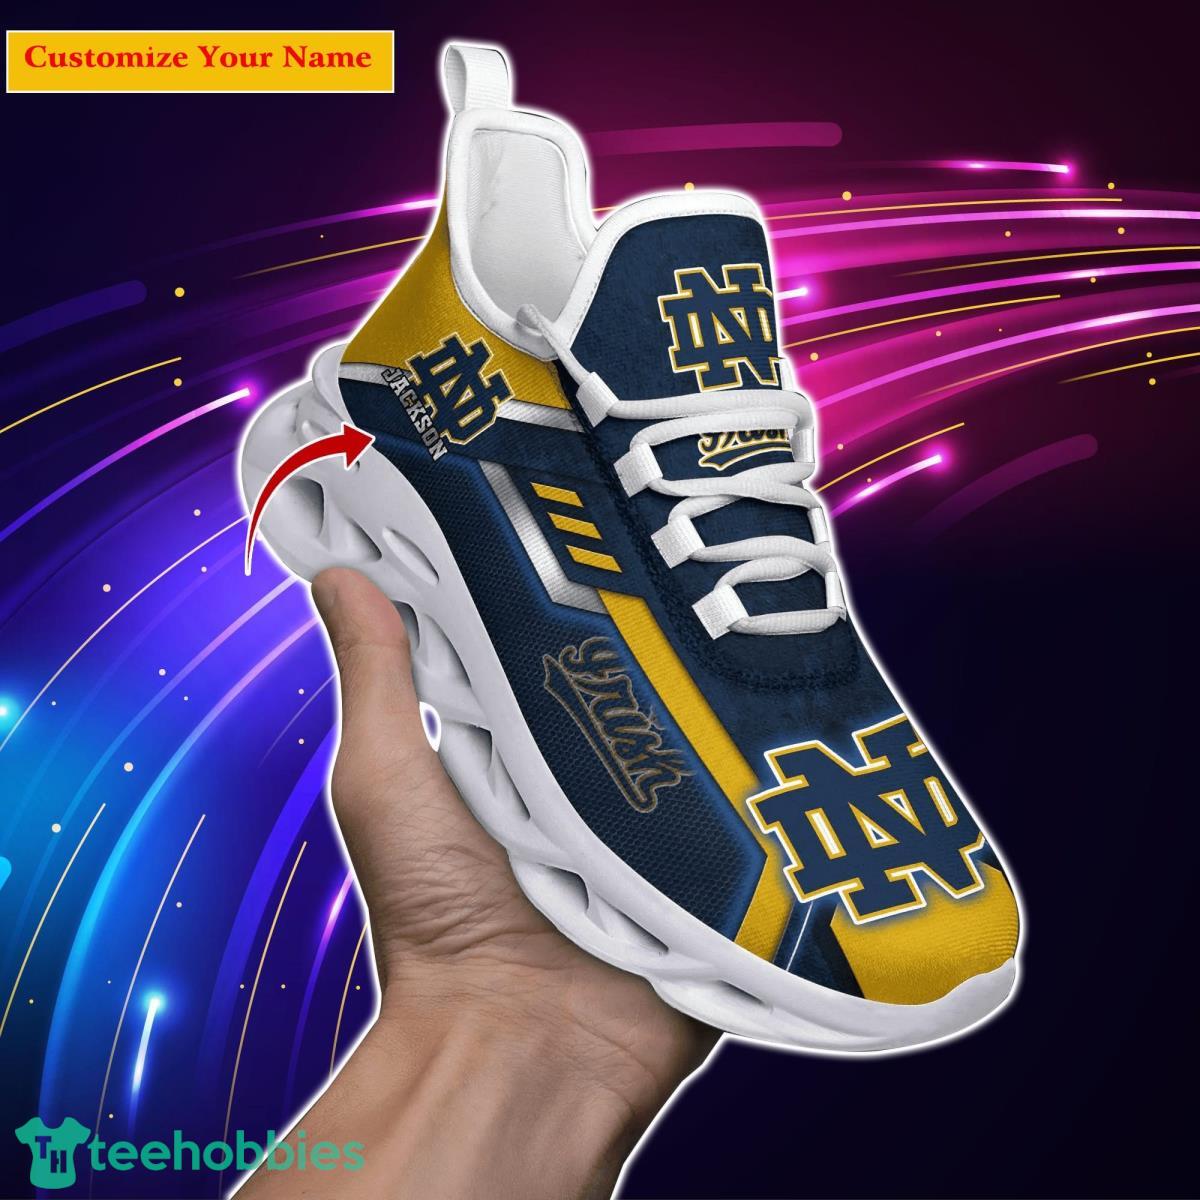 Notre Dame Fighting Irish NCAA1 Custom Name Max Soul Shoes Impressive Gift For Men Women Fans Product Photo 1